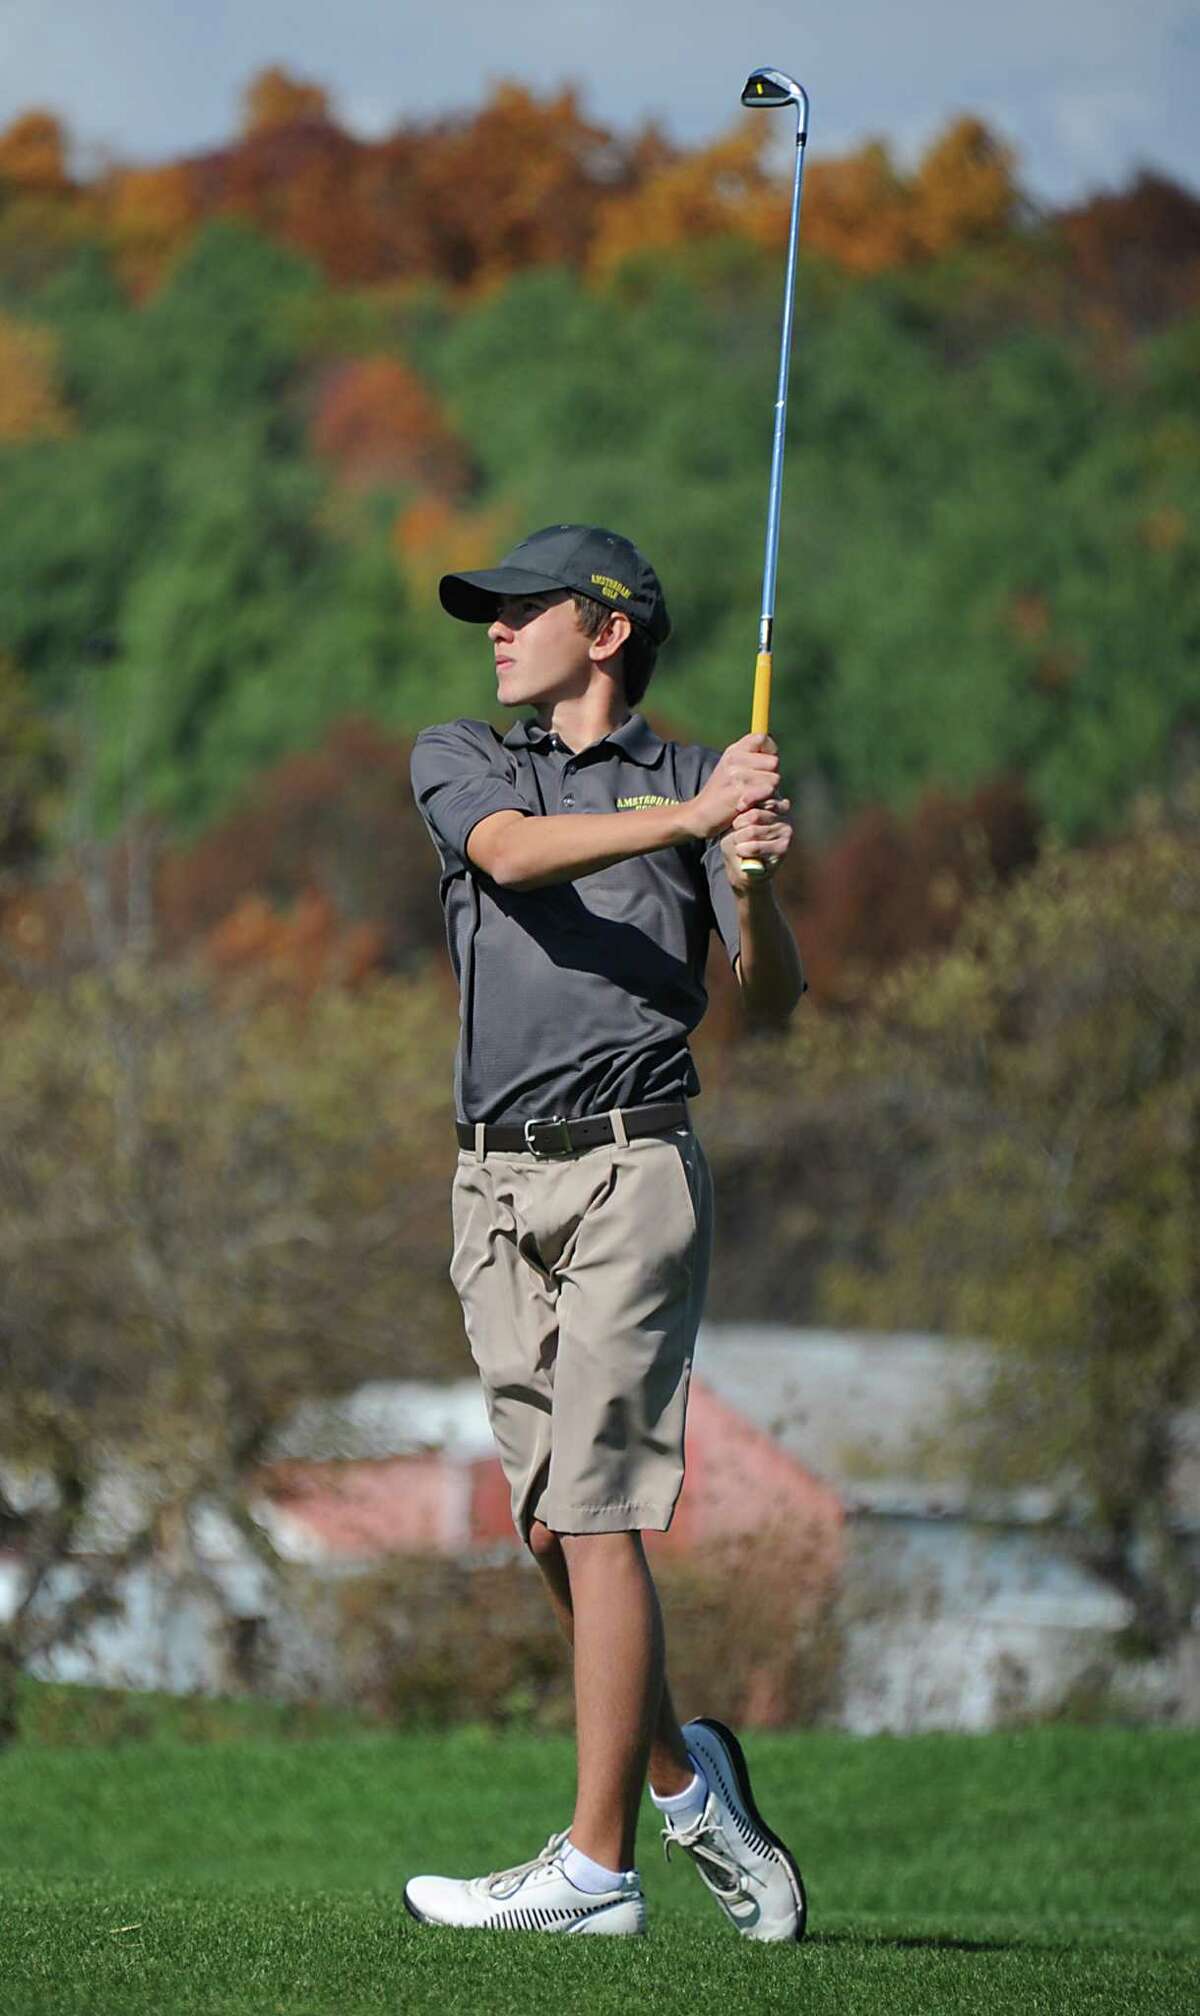 Amsterdam's James Phelps hits a tee shot during the Section II state golf qualifier at Orchard Creek Golf Club on Friday, Oct. 17, 2014 in Altamont, N.Y.(Lori Van Buren / Times Union)